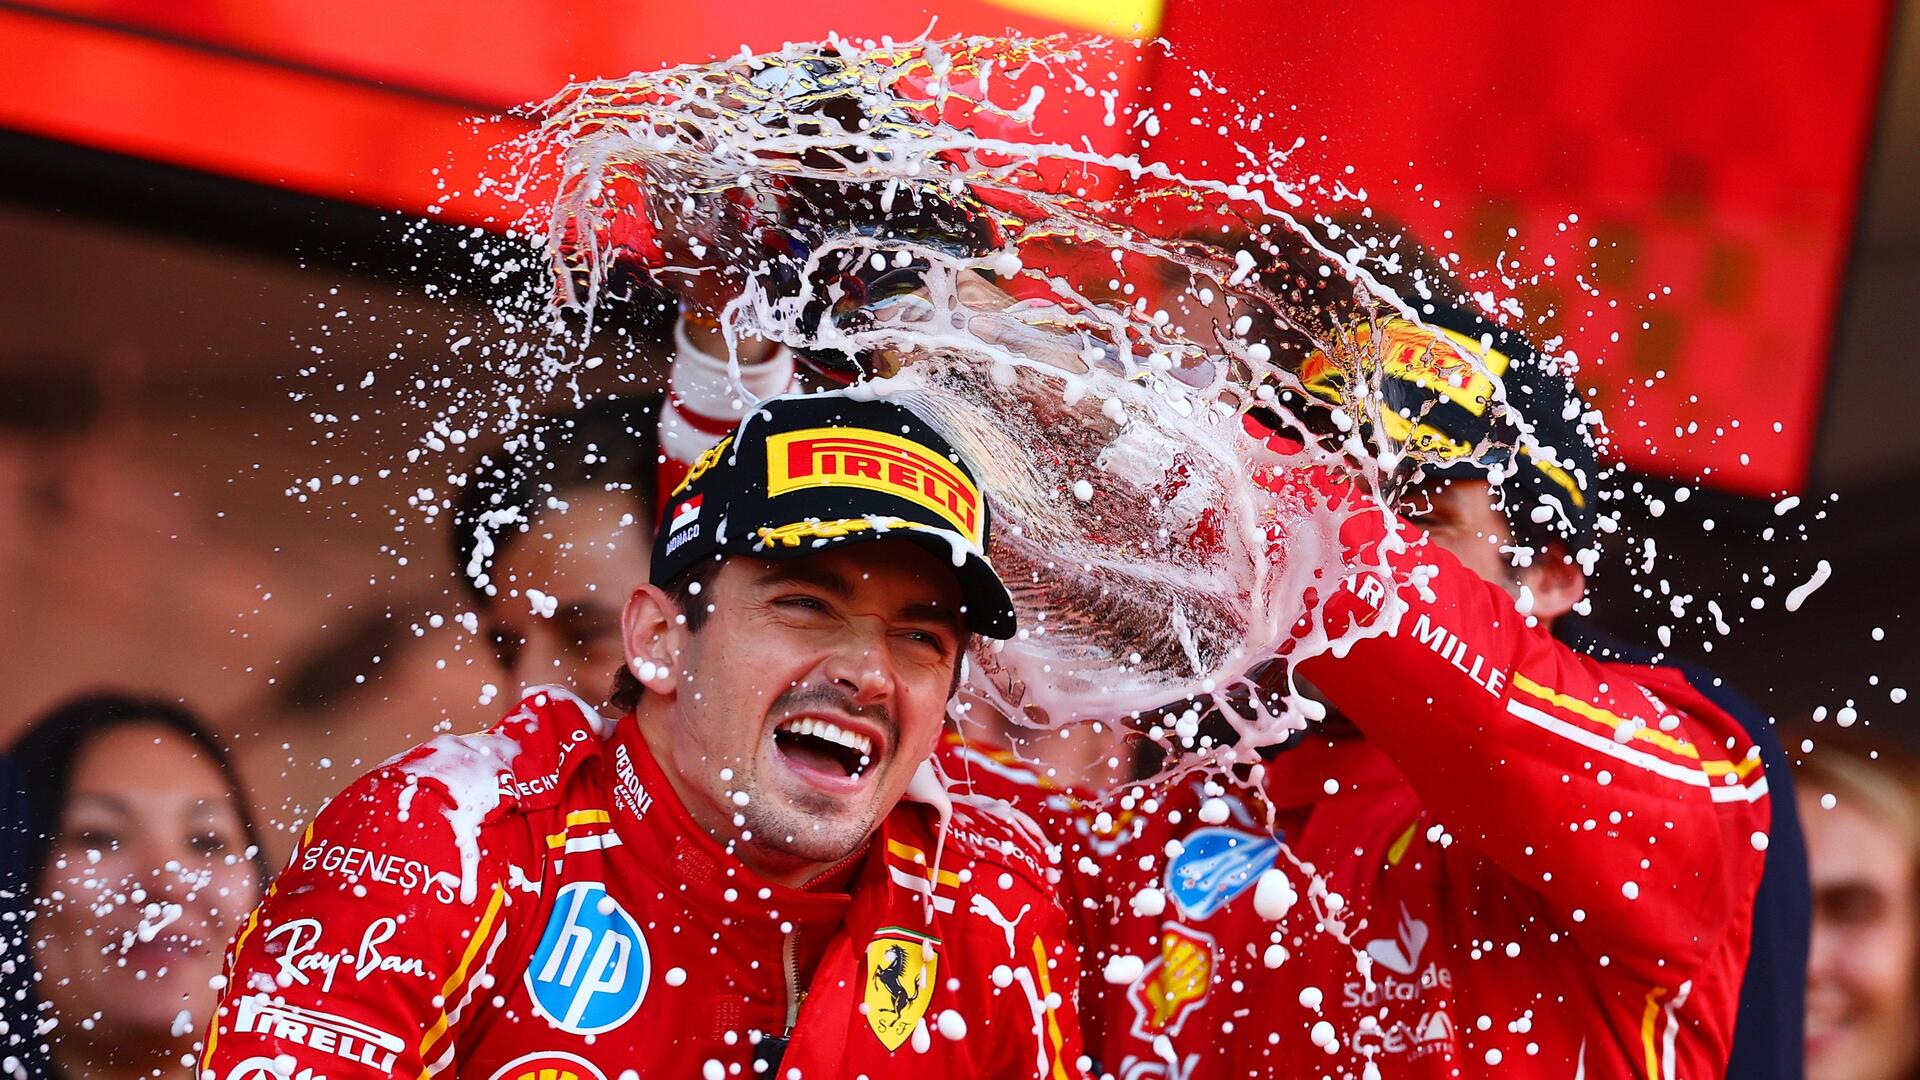 Charles Leclerc attains these feats with Monaco GP win Details